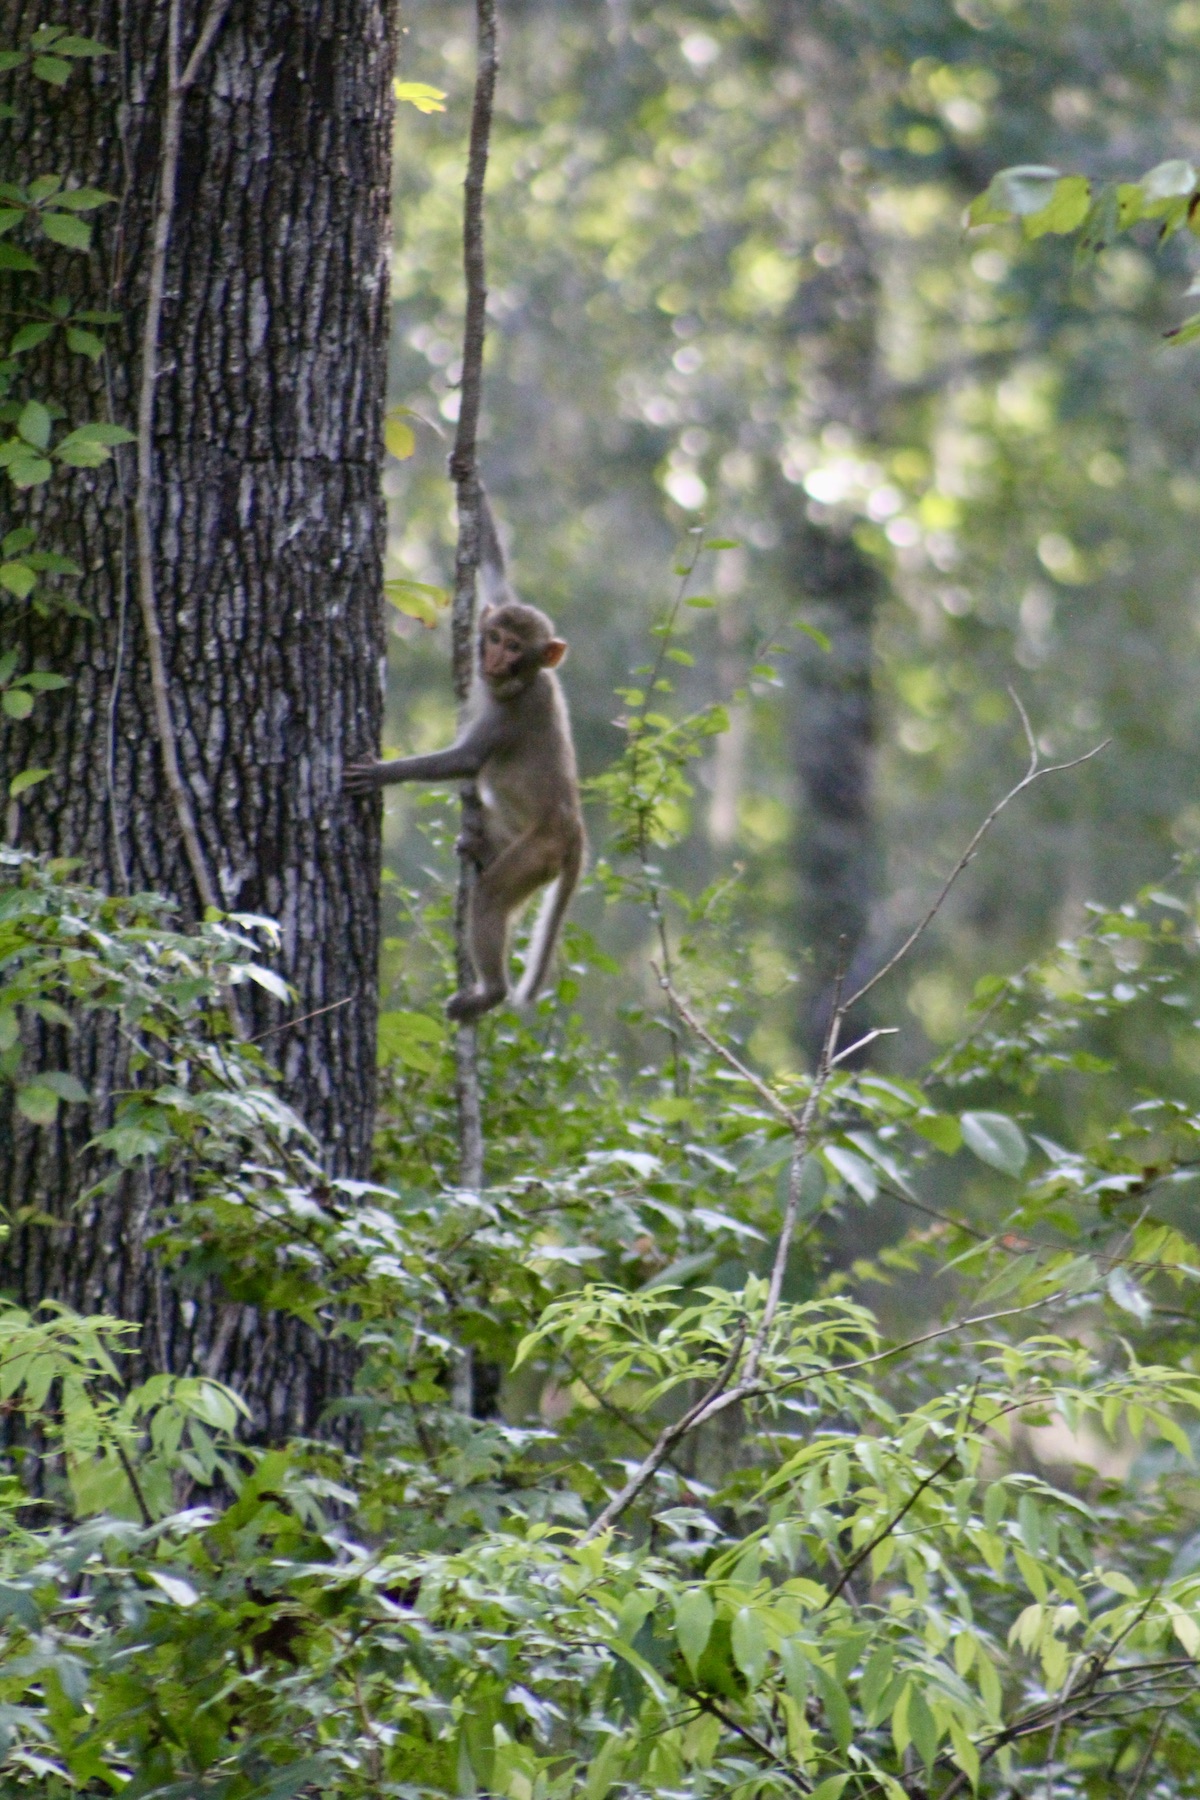 Juvenile rhesus macaque monkey swinging on a vine at Silver Springs State Park